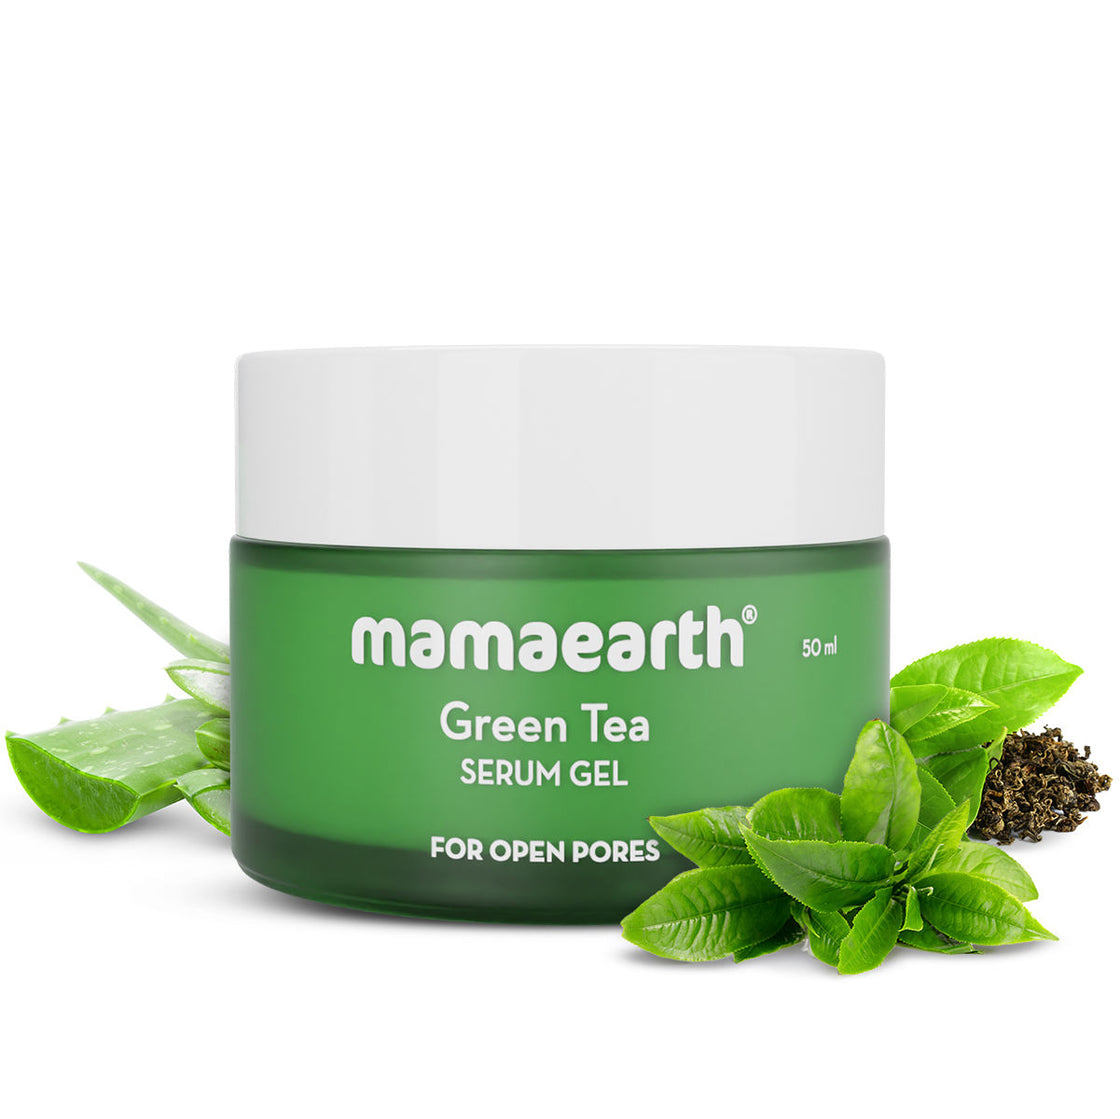 Mamaearth Green Tea Serum Gel With Green Tea & Collagen For Open Pores - Moisturizers-2